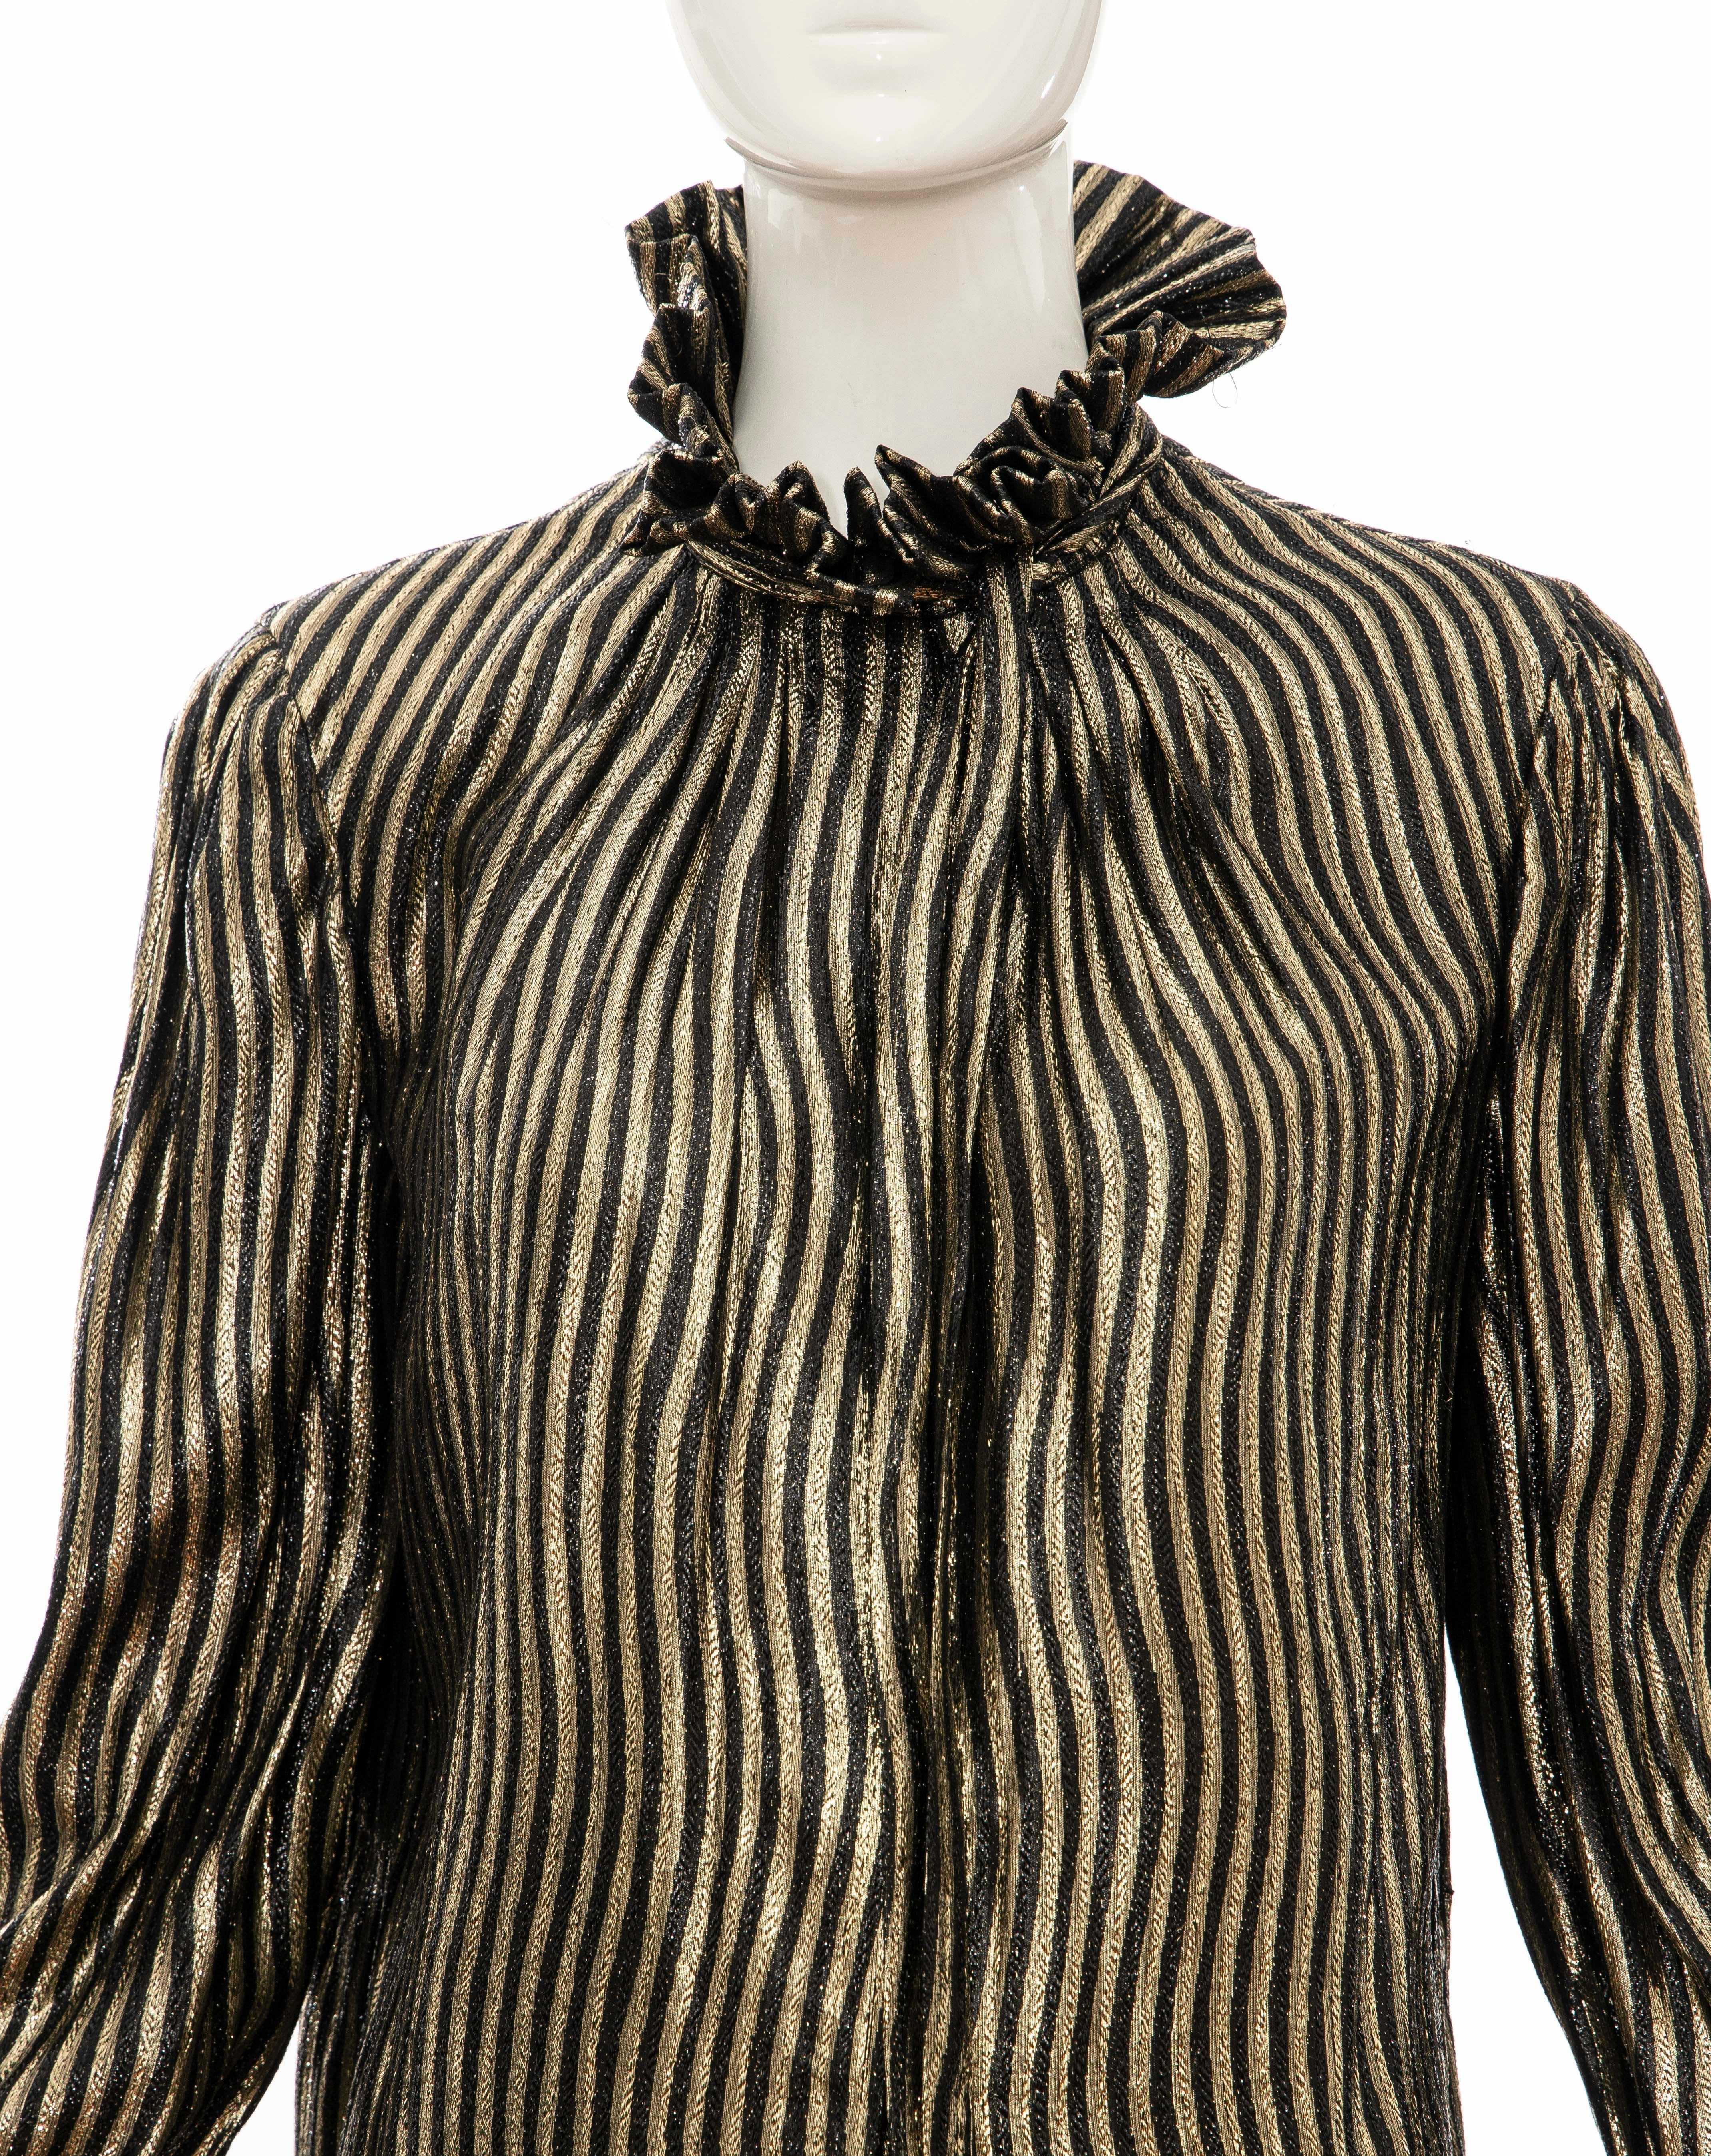 Pauline Trigere Black Gold Striped Metallic Snap Front Blouse, Circa: 1970's For Sale 1